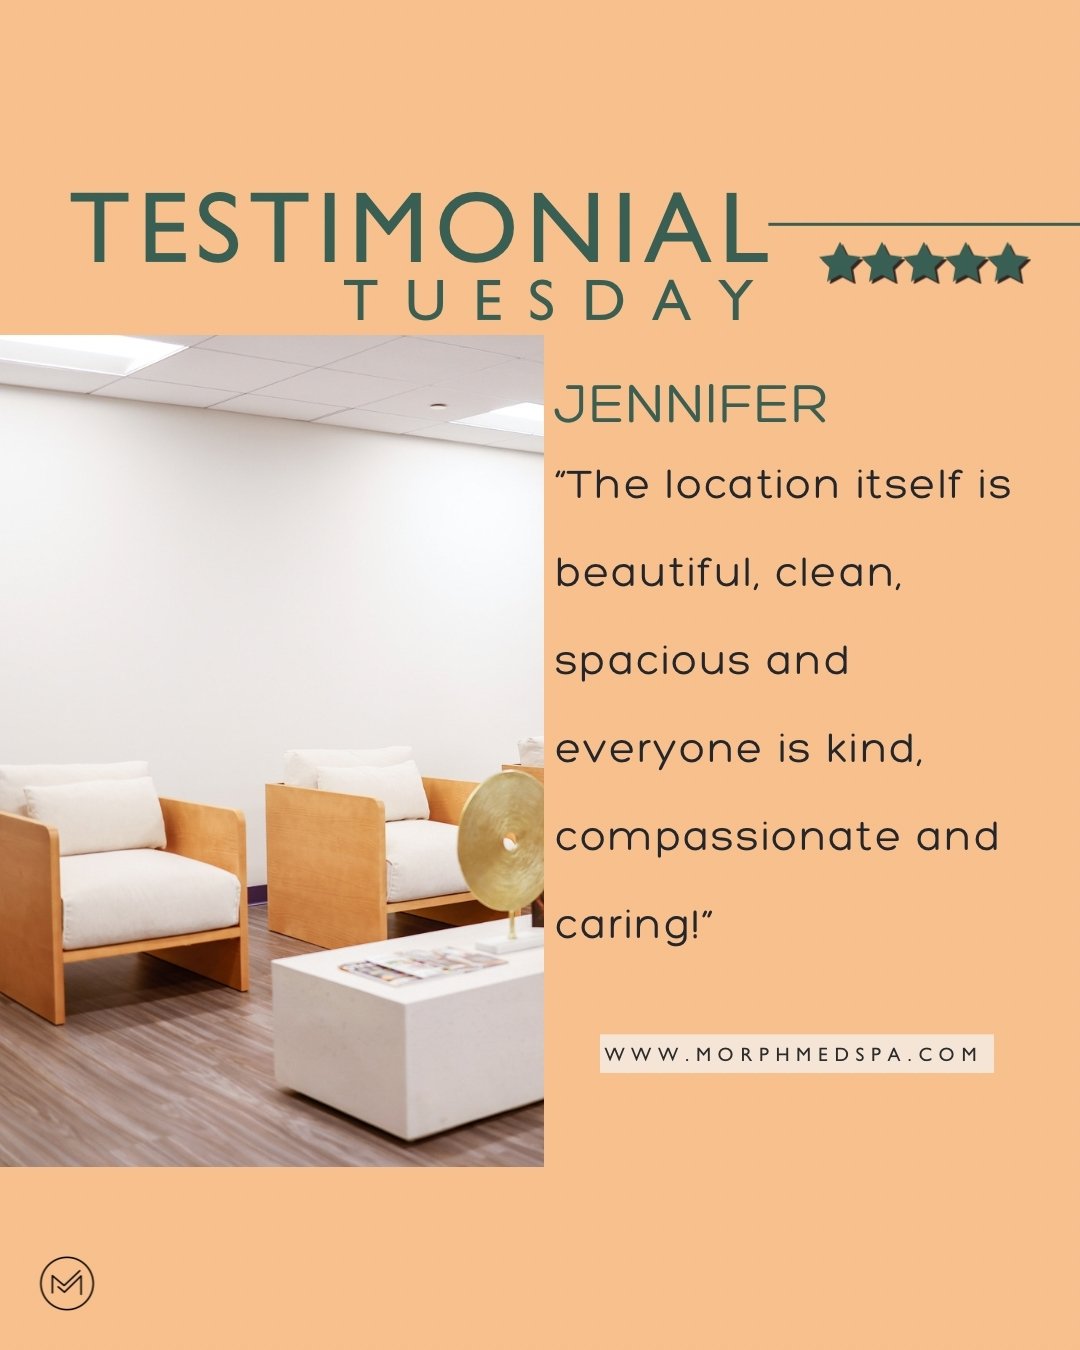 Whether you&rsquo;re in the waiting room or receiving your treatment&hellip;

We strive to create a welcoming and comfortable environment. 

.
.
.

#testimonialtuesday #googlereviews #

 #evidencebasedmedicine #personalizedmedicine #integrativemedici